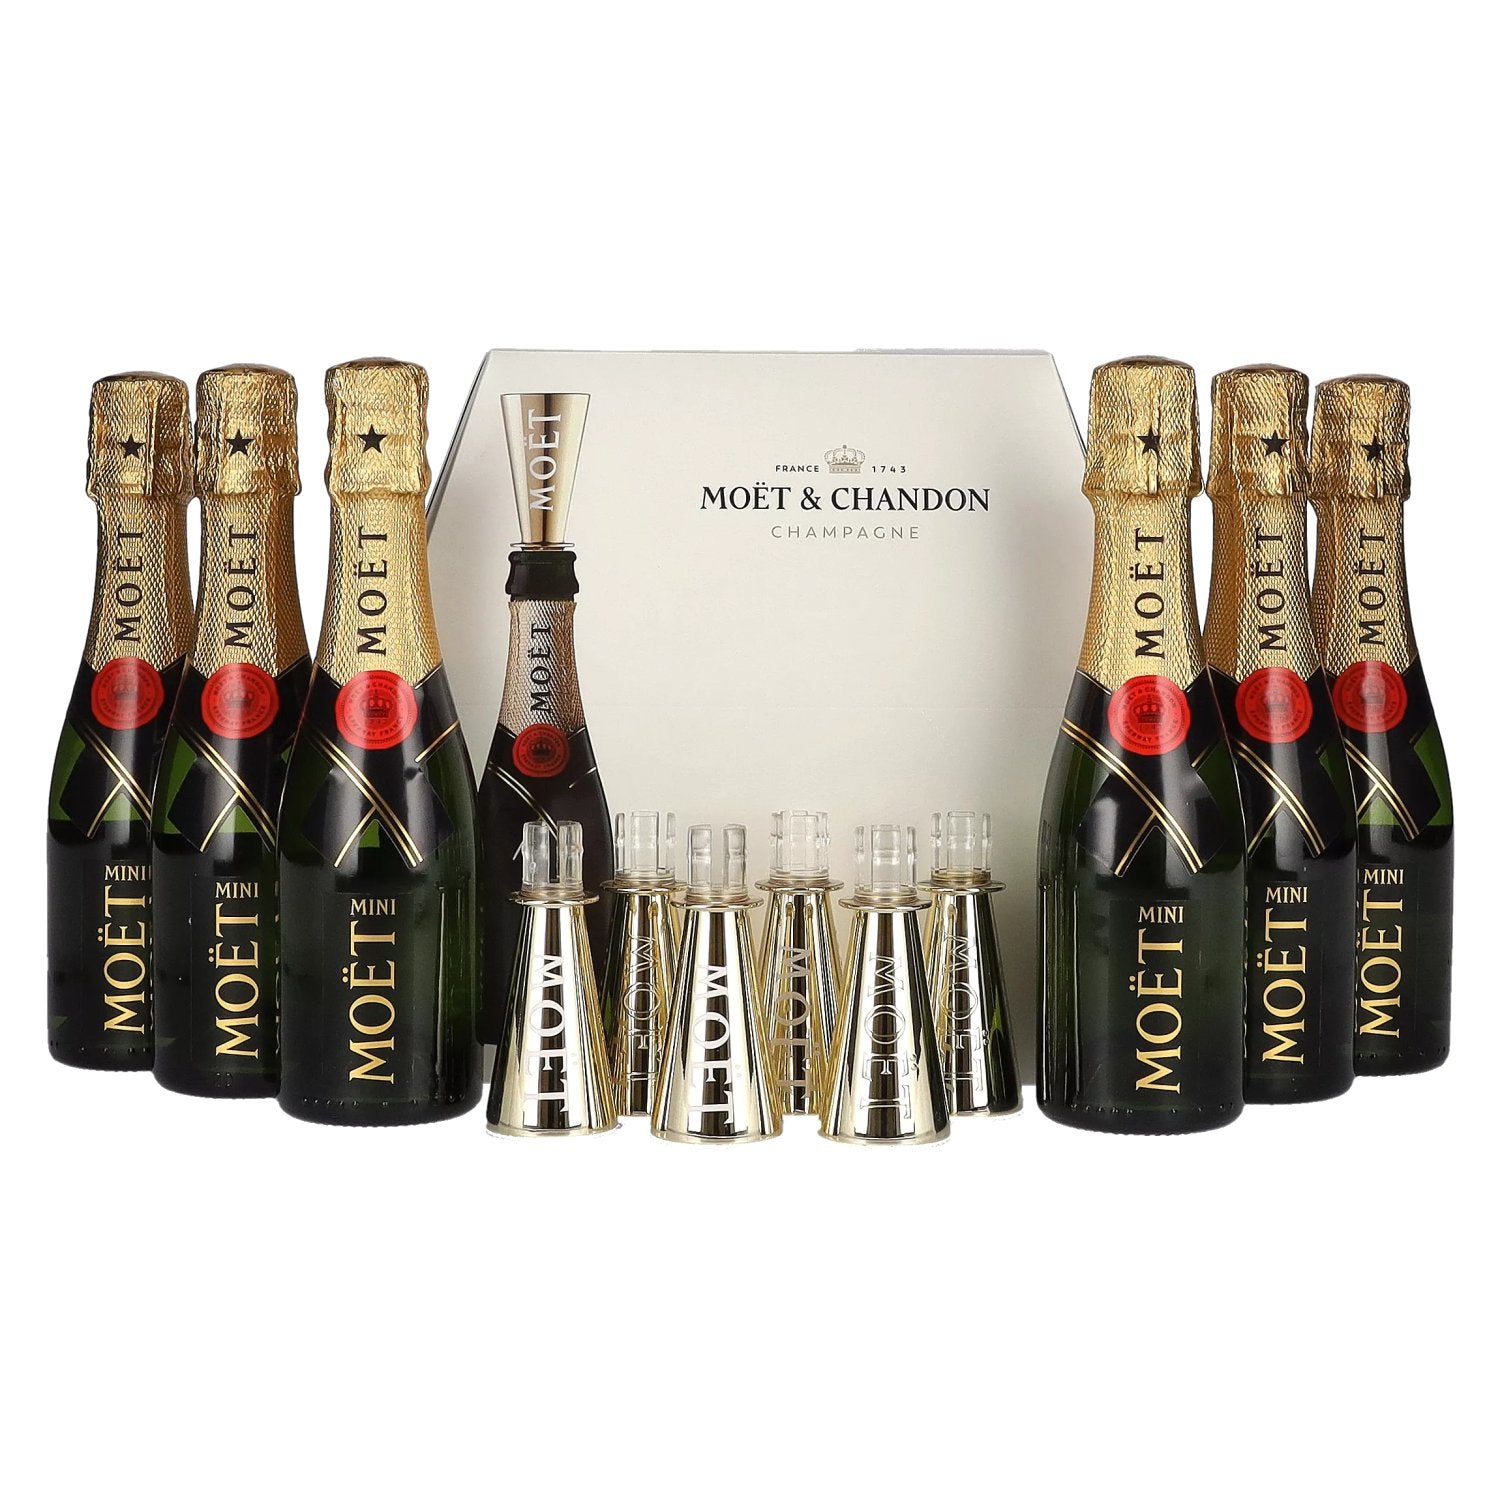 Moet & Chandon Champagne AT HOME PACK 12% Vol. 6x0,2l in Giftbox with Bottle Sippers